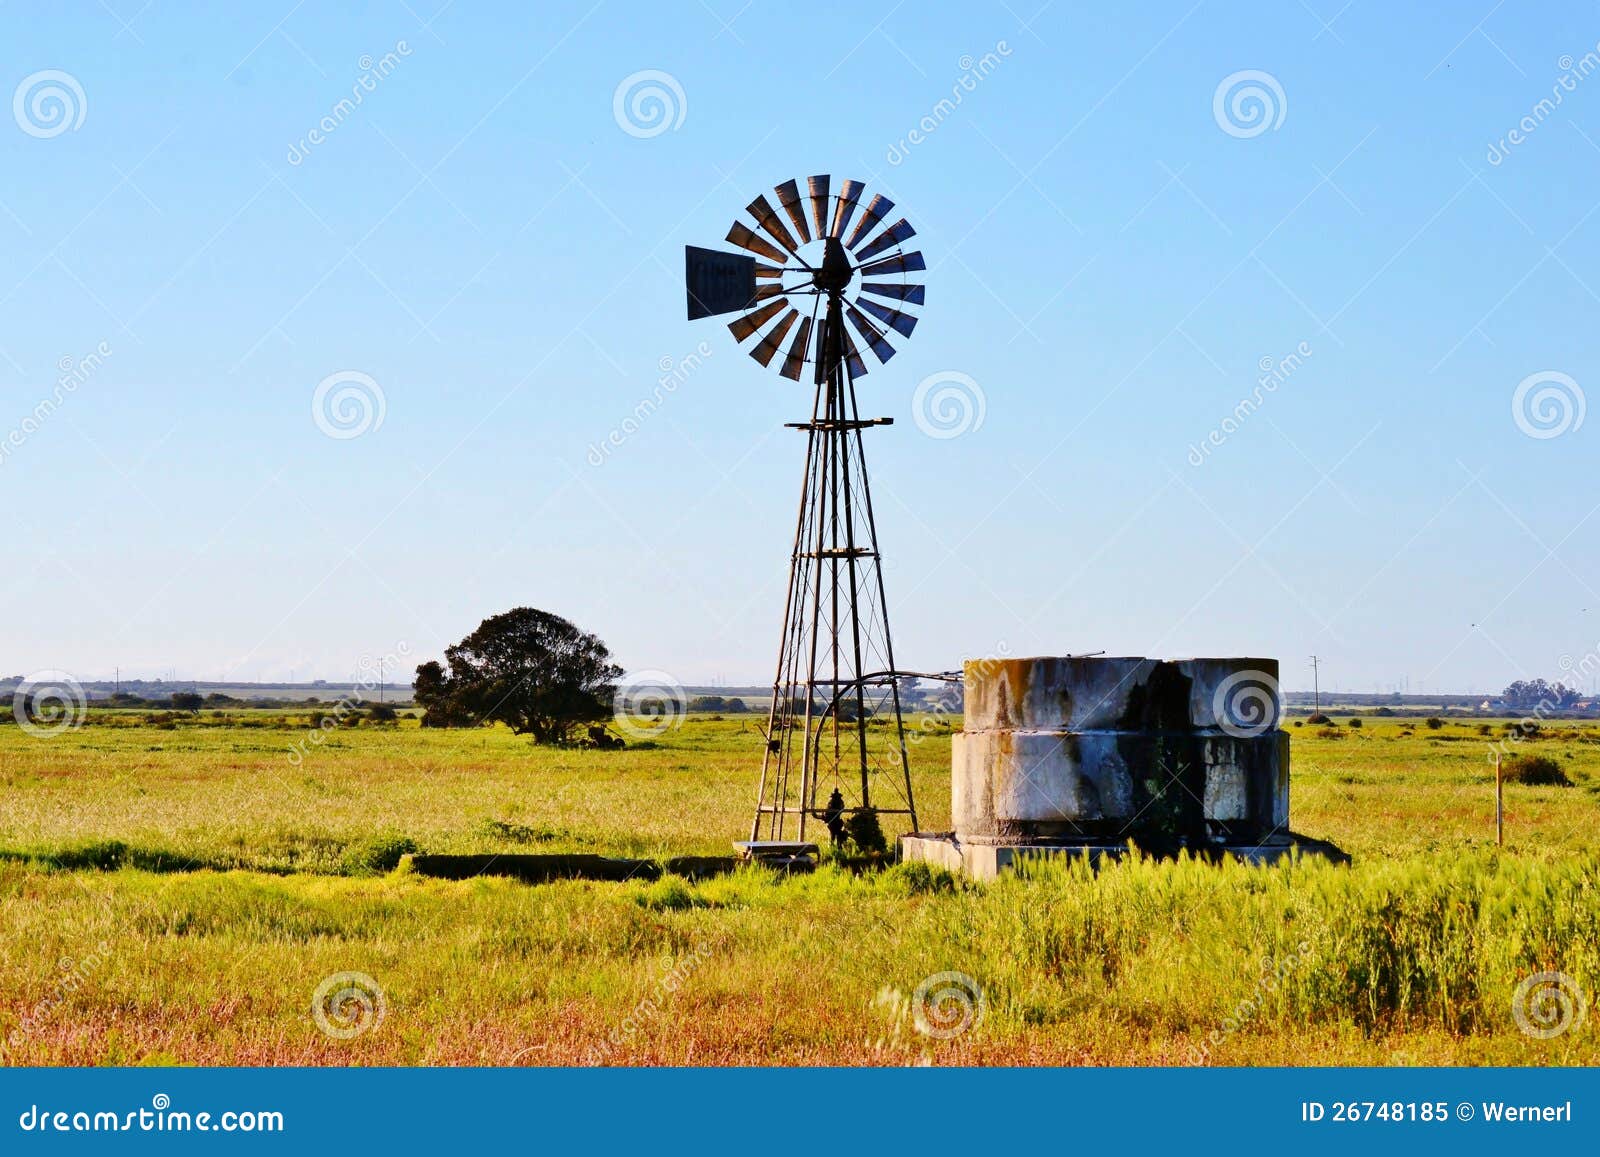 Landscape with windmill water pump on a farm westerncape south africa.